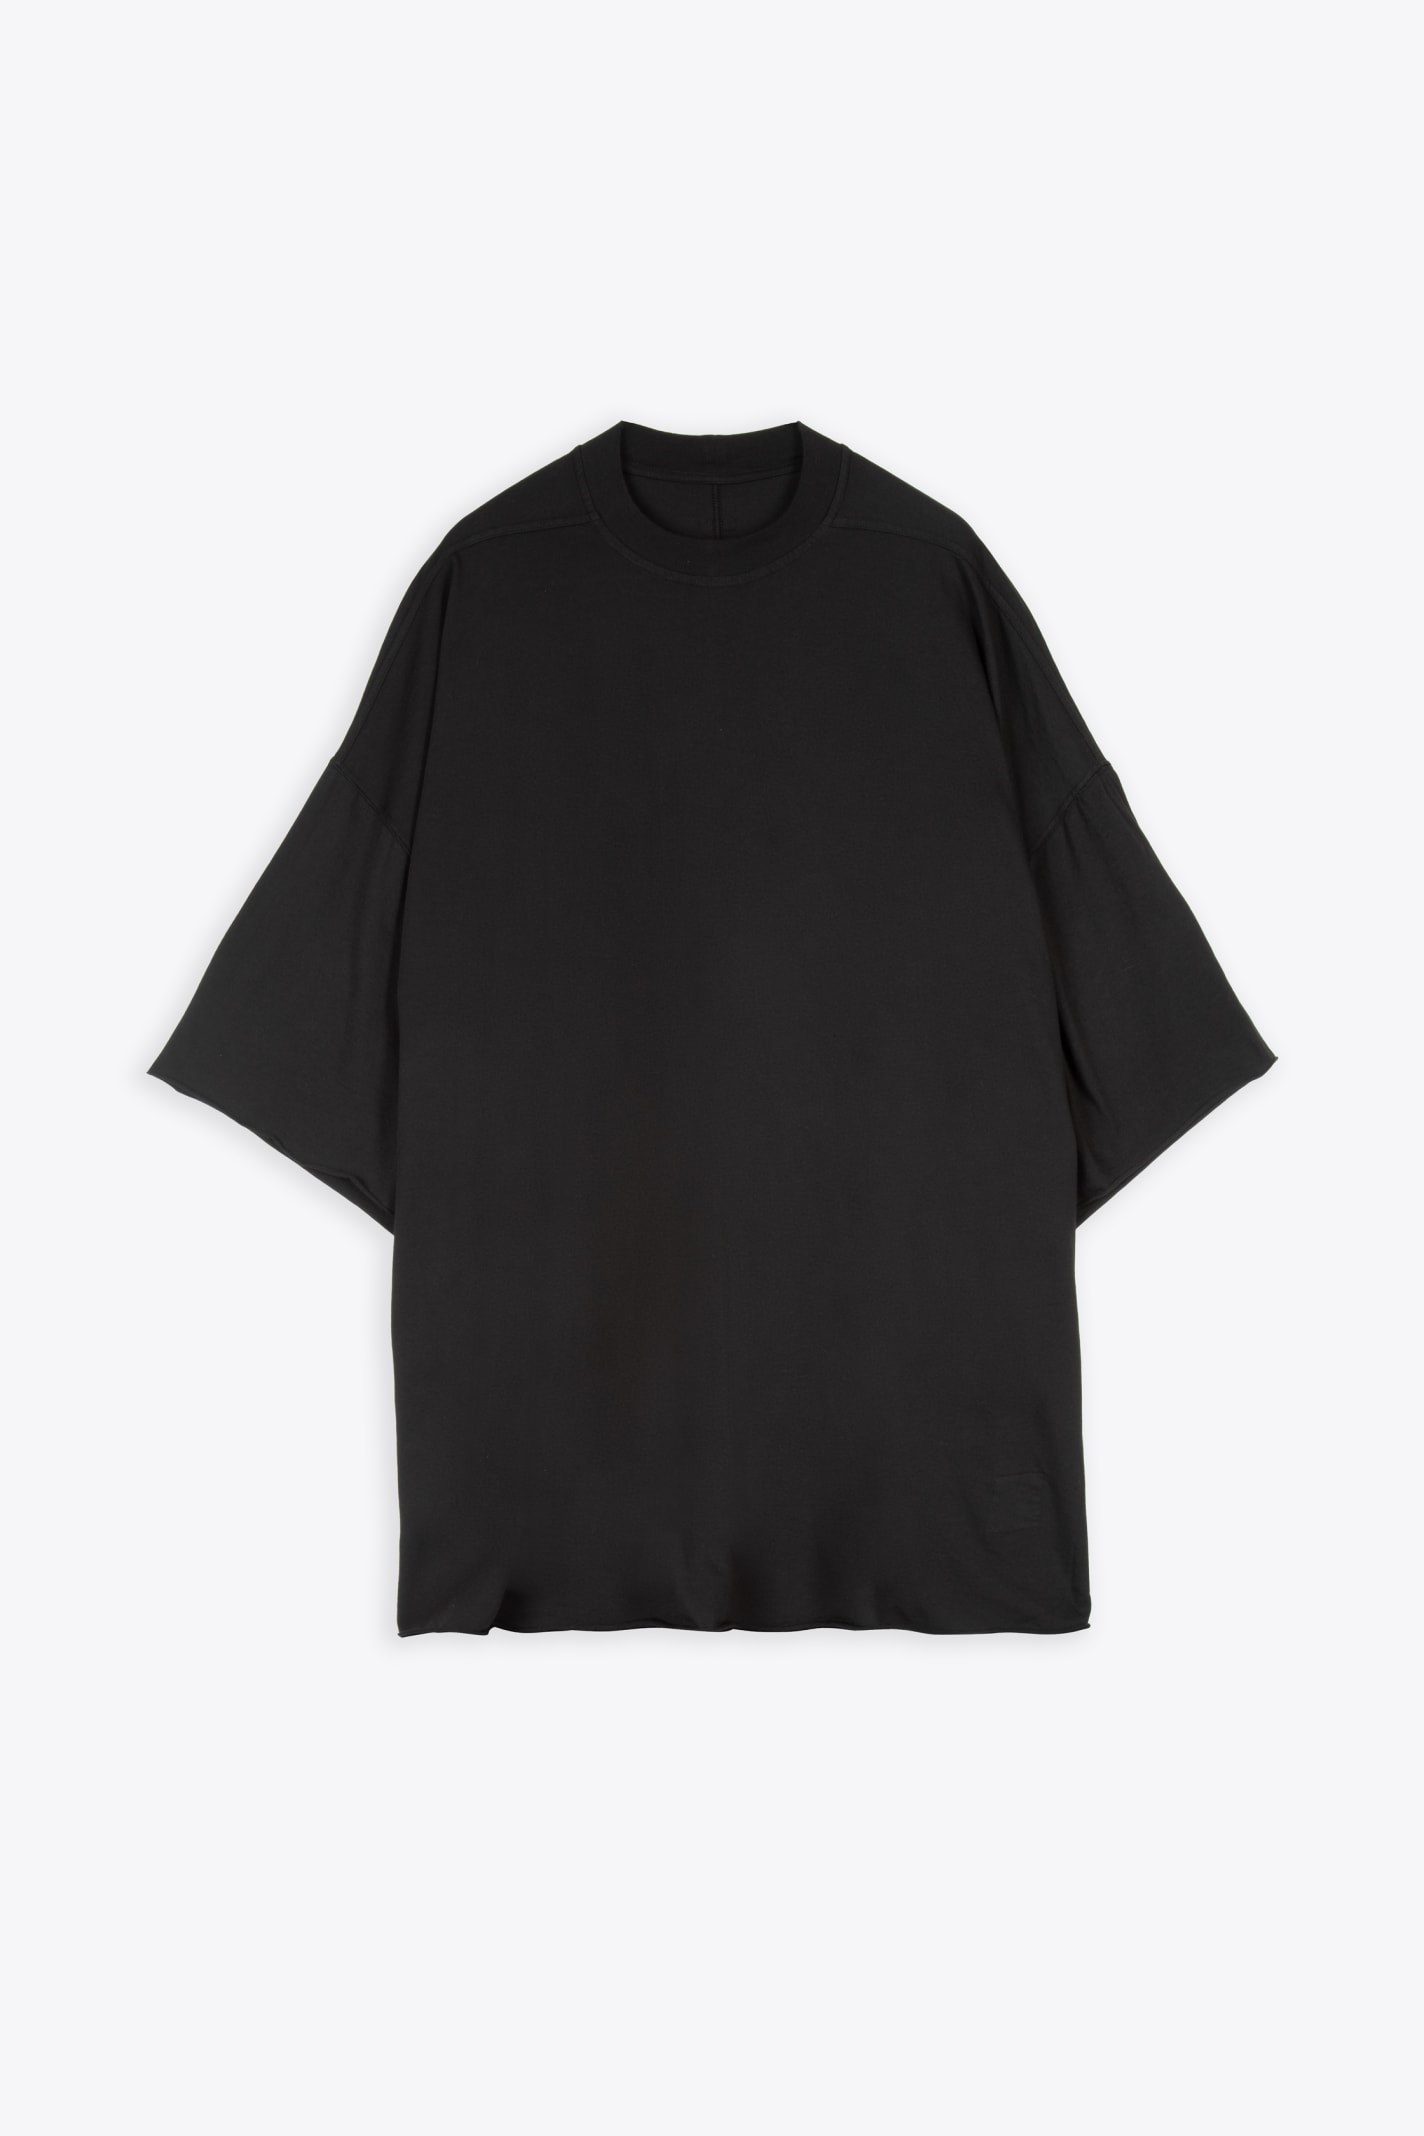 Drkshdw Tommy T Black Cotton Oversized T-shirt With Raw-cut Hems - Tommy T